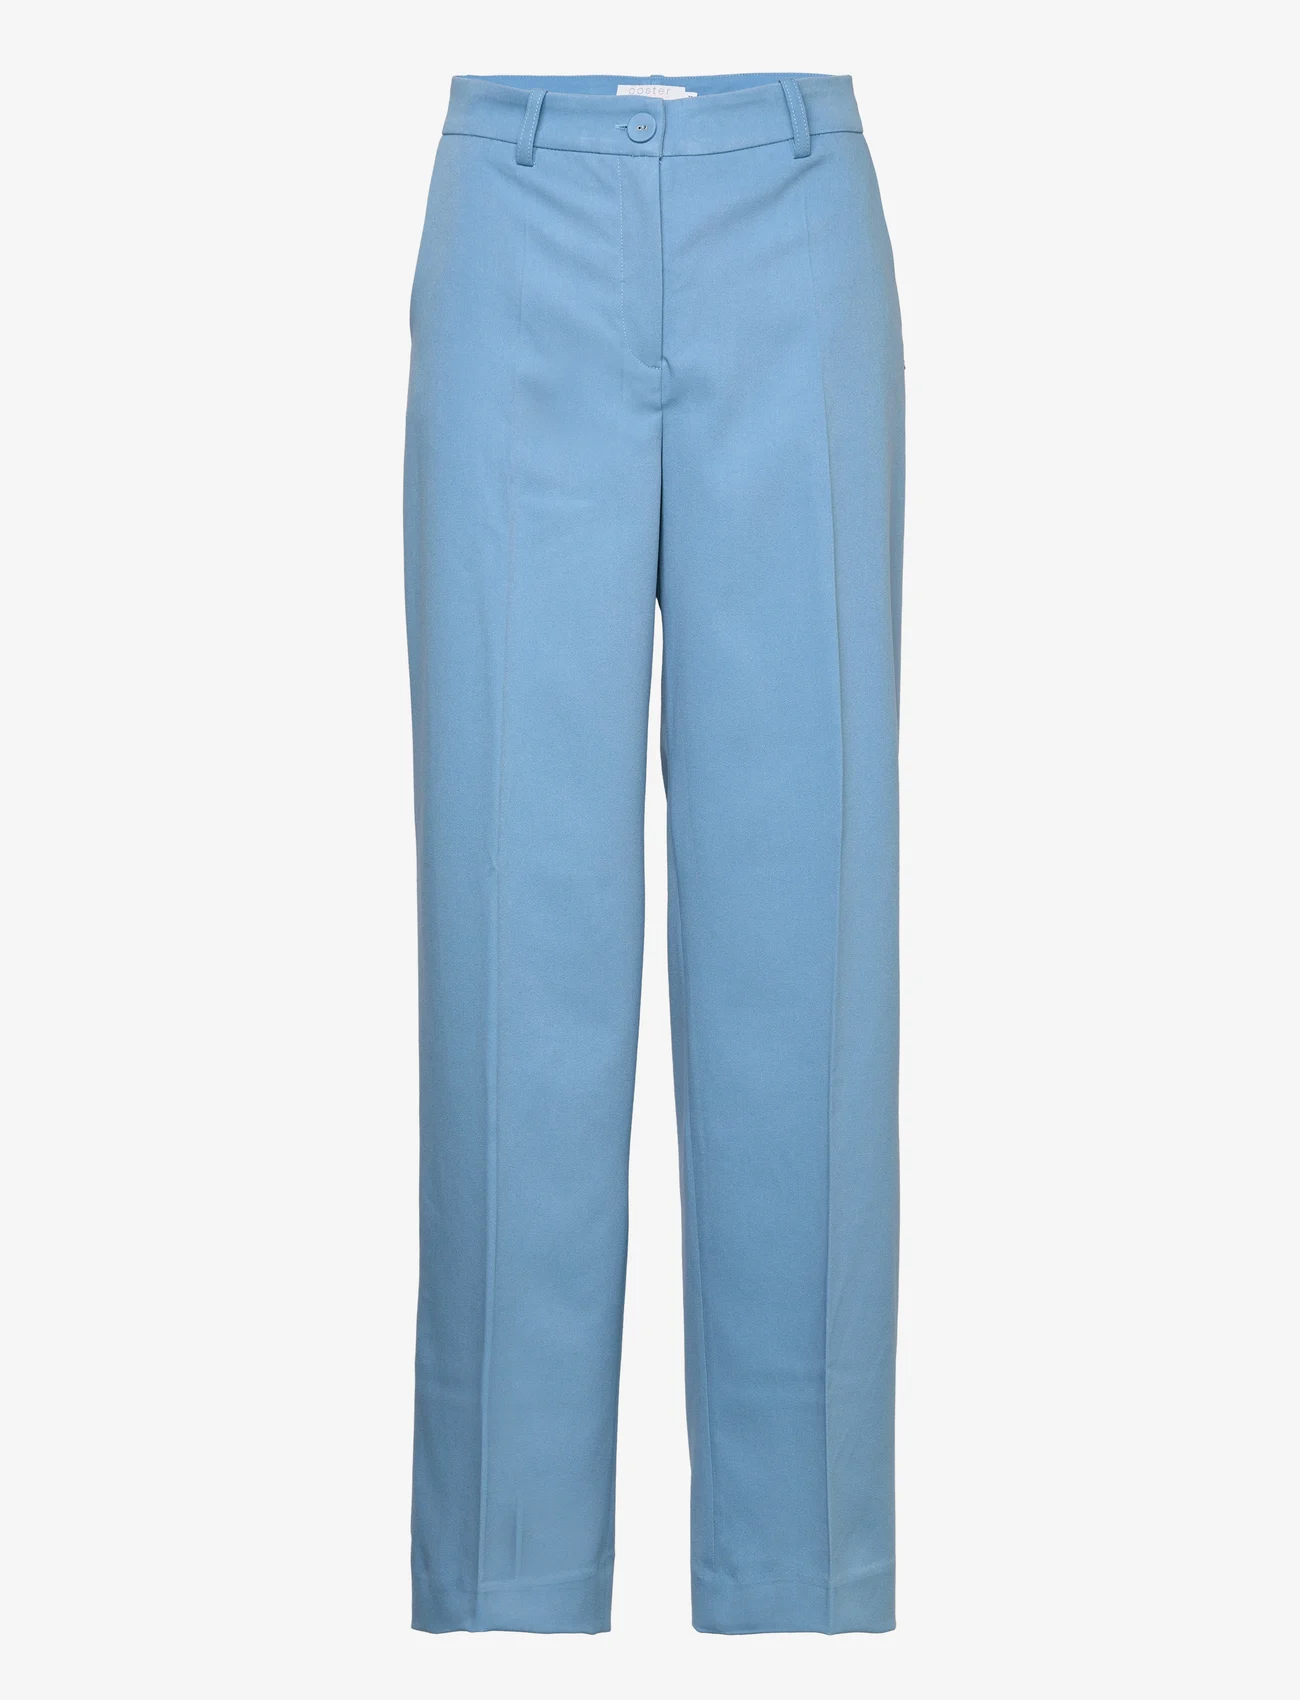 Coster Copenhagen - Pants with wide legs - Petra fit - tailored trousers - cool blue - 0